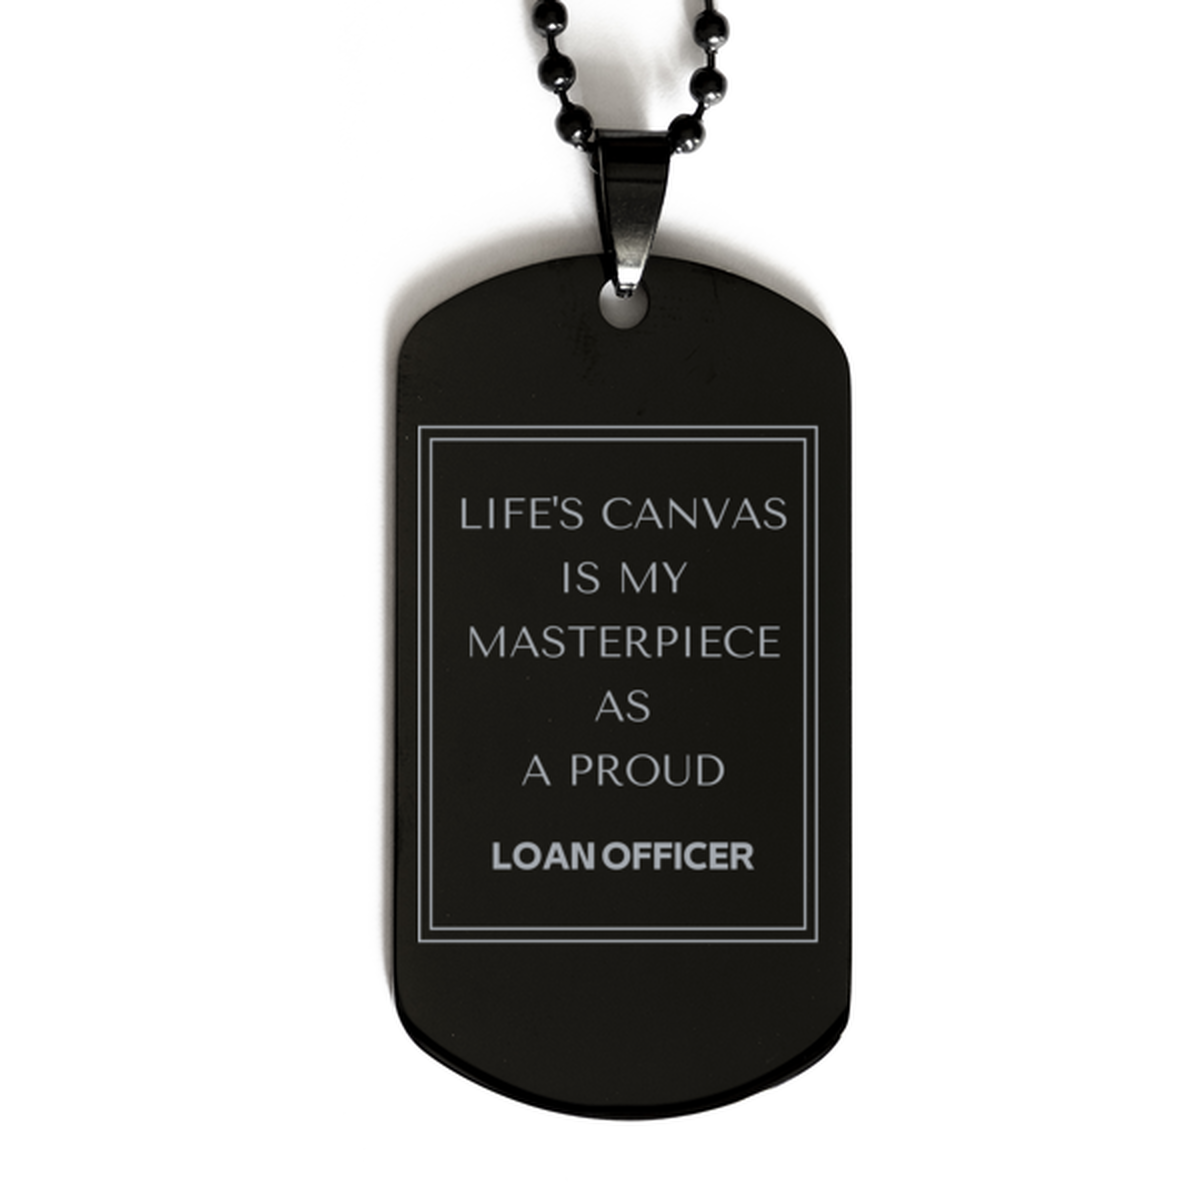 Proud Loan Officer Gifts, Life's canvas is my masterpiece, Epic Birthday Christmas Unique Black Dog Tag For Loan Officer, Coworkers, Men, Women, Friends